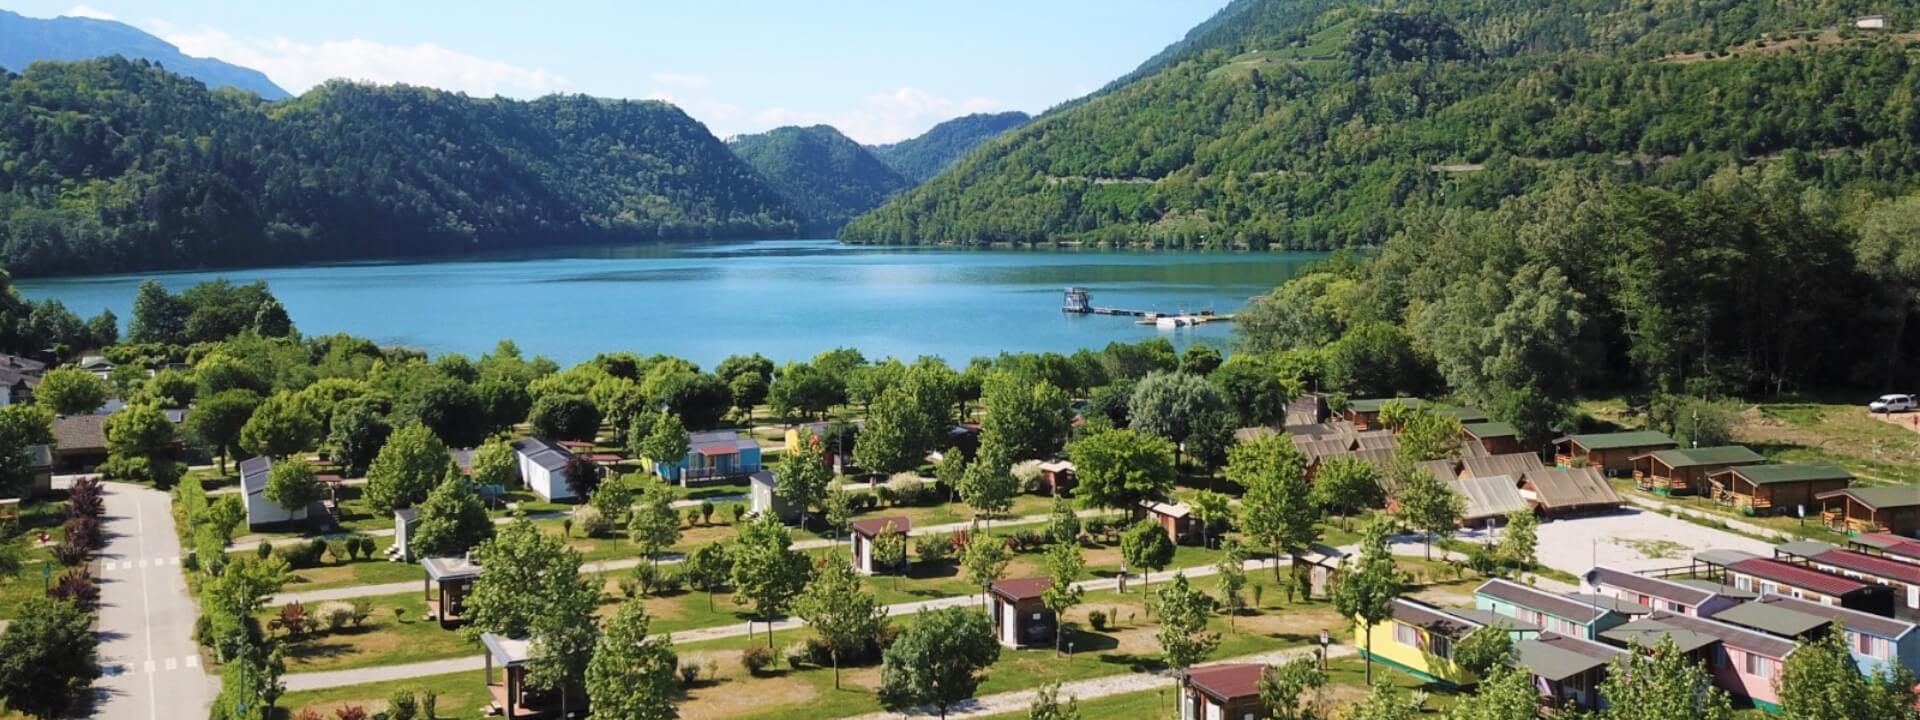 campinglevico en offer-campsite-for-families-lake-levico-with-entertainment 005